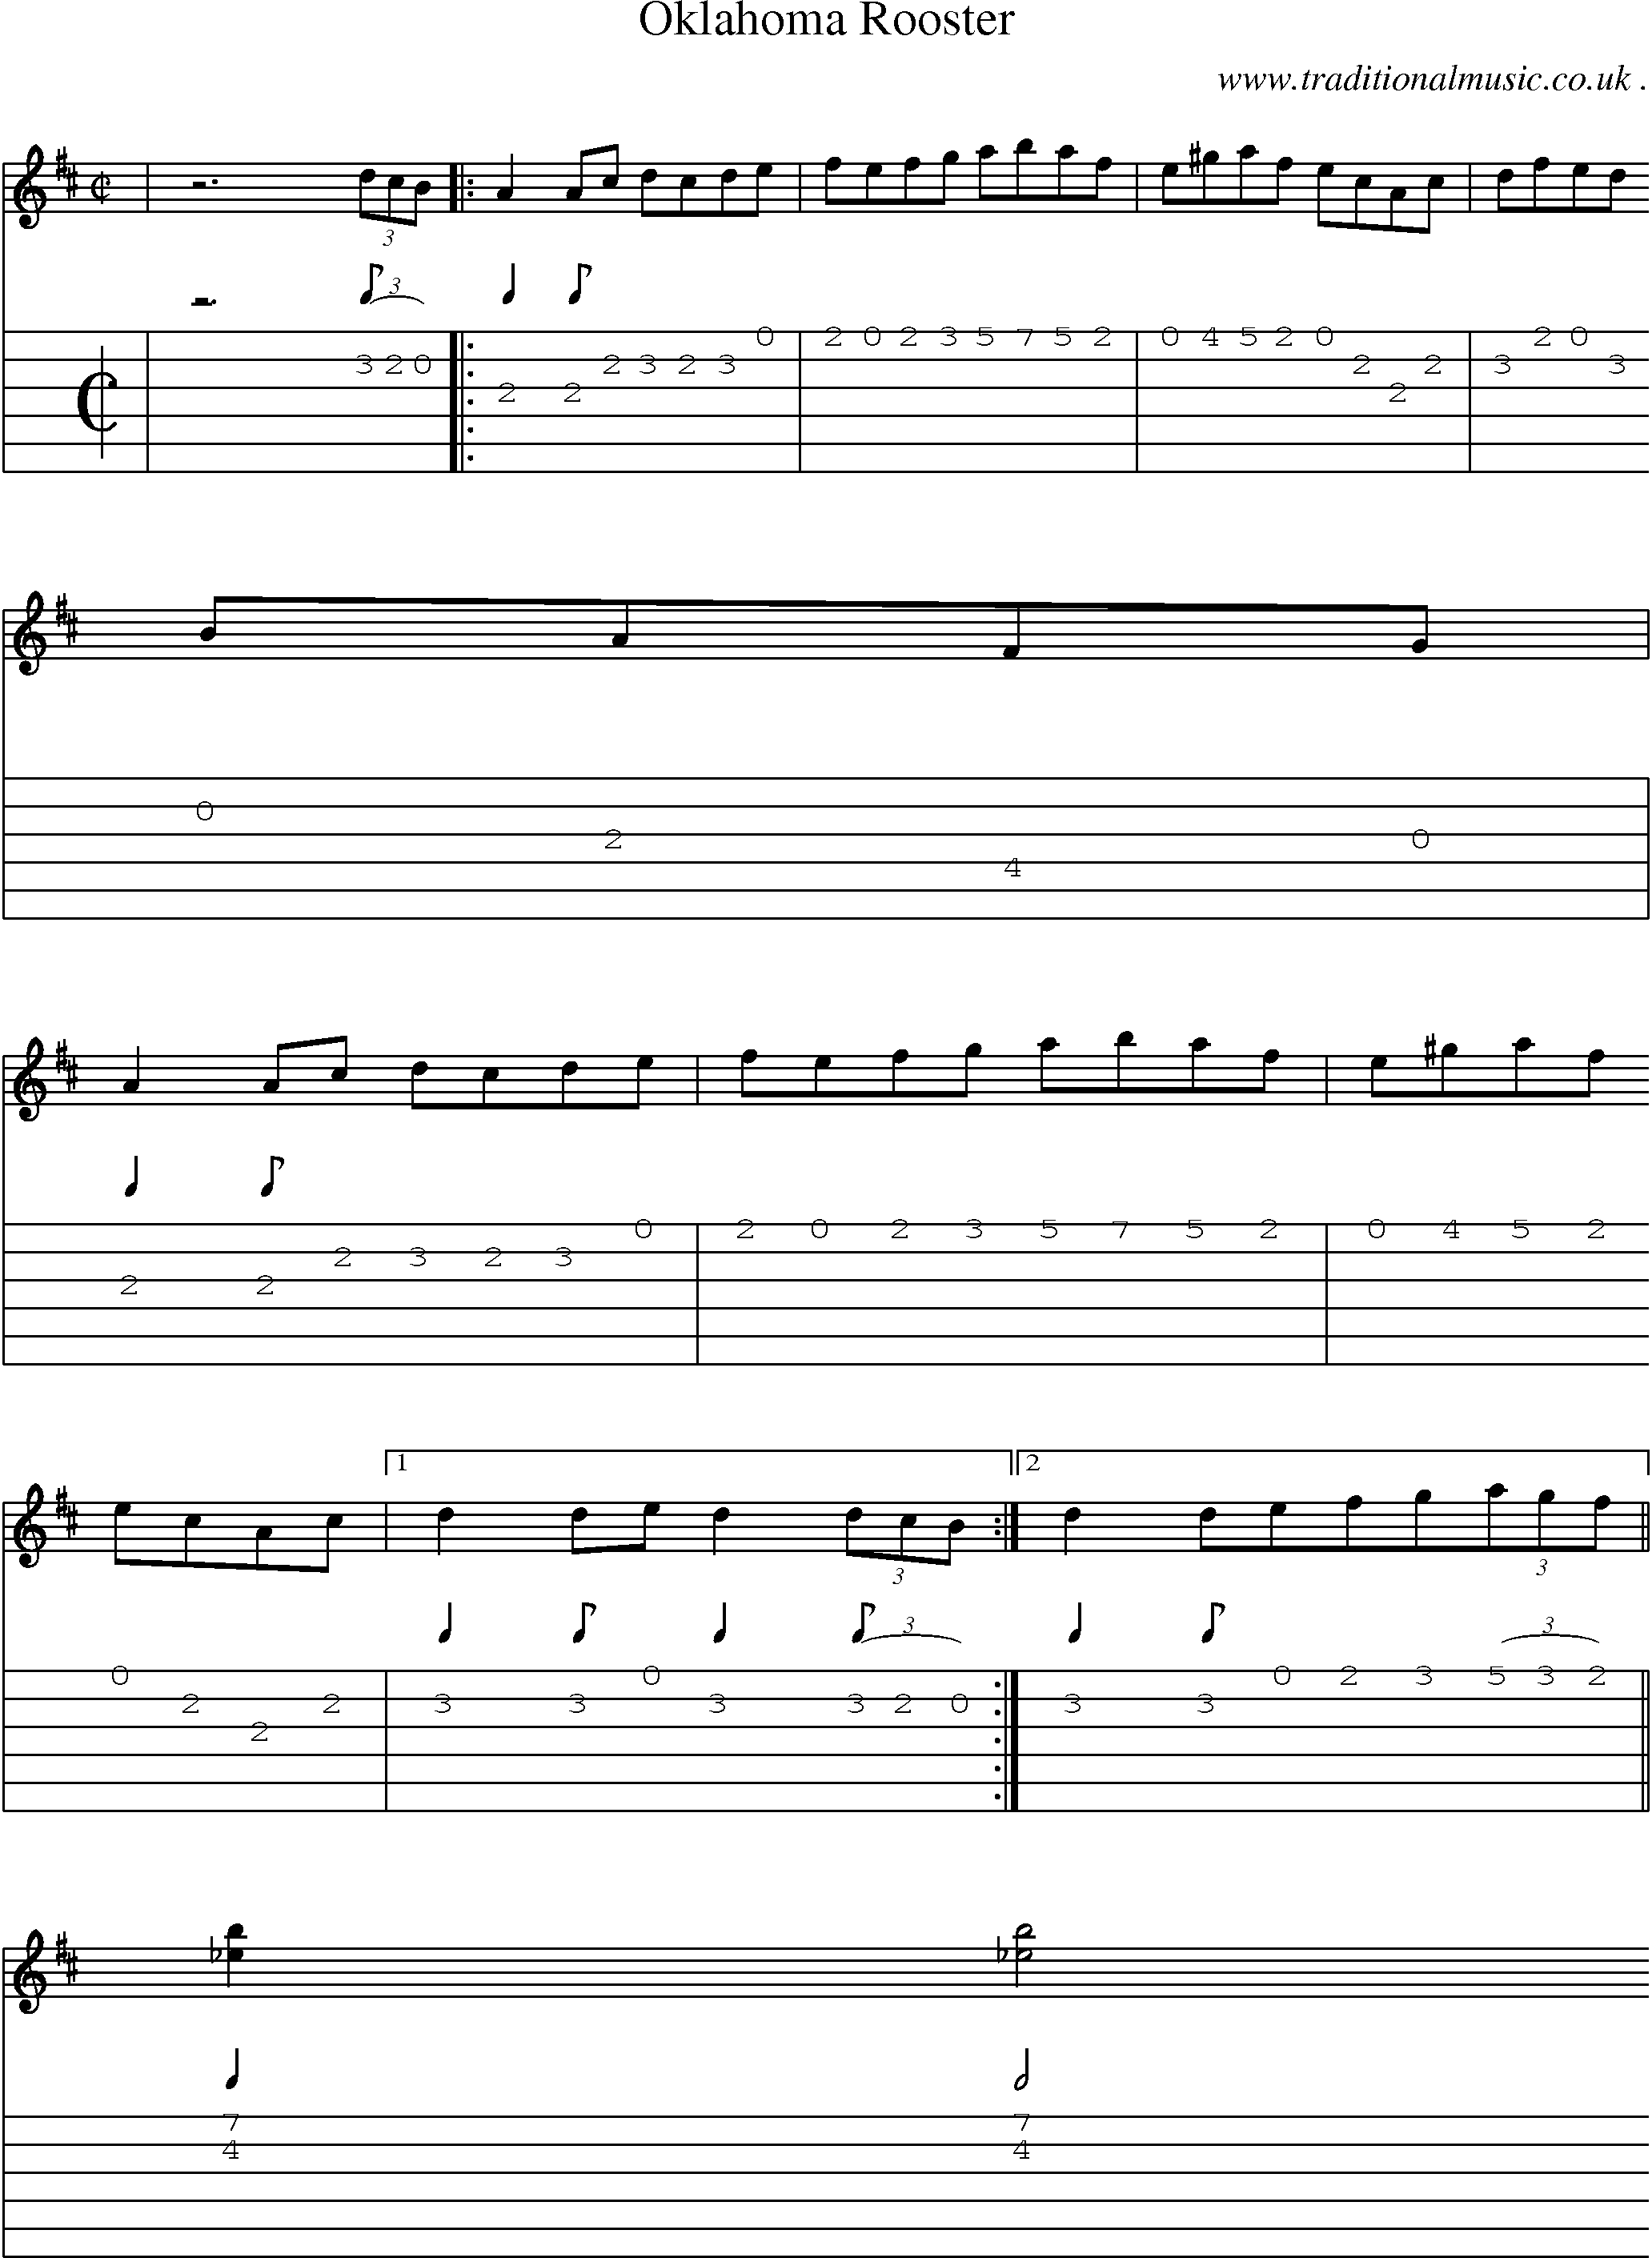 Music Score and Guitar Tabs for Oklahoma Rooster